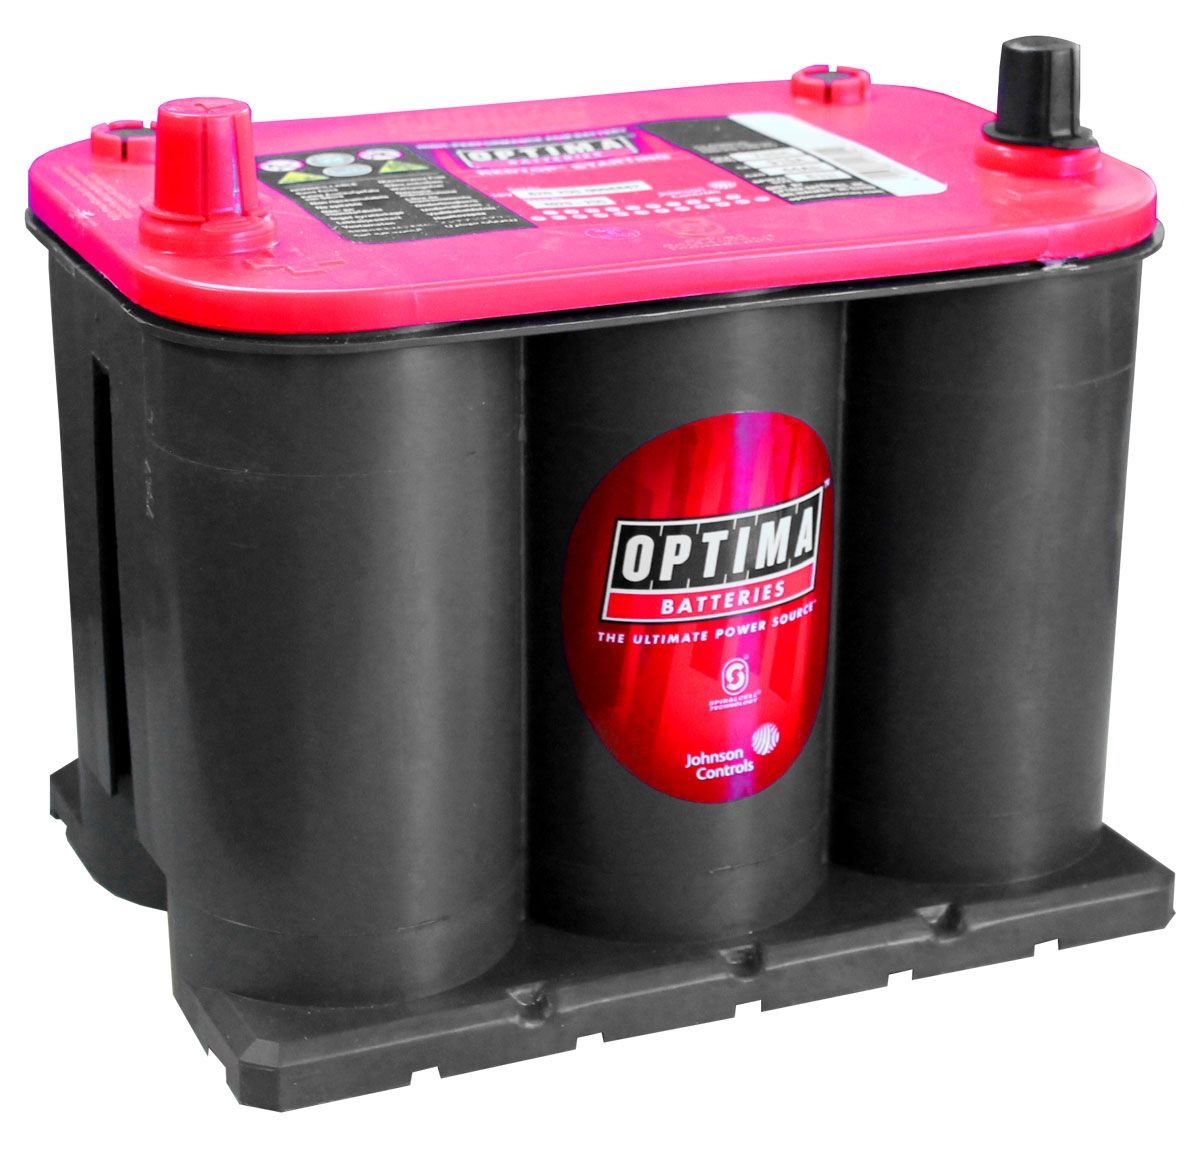 optima-red-top-battery-rts-3-7-8020-255-bci-25-rts3-7-agm